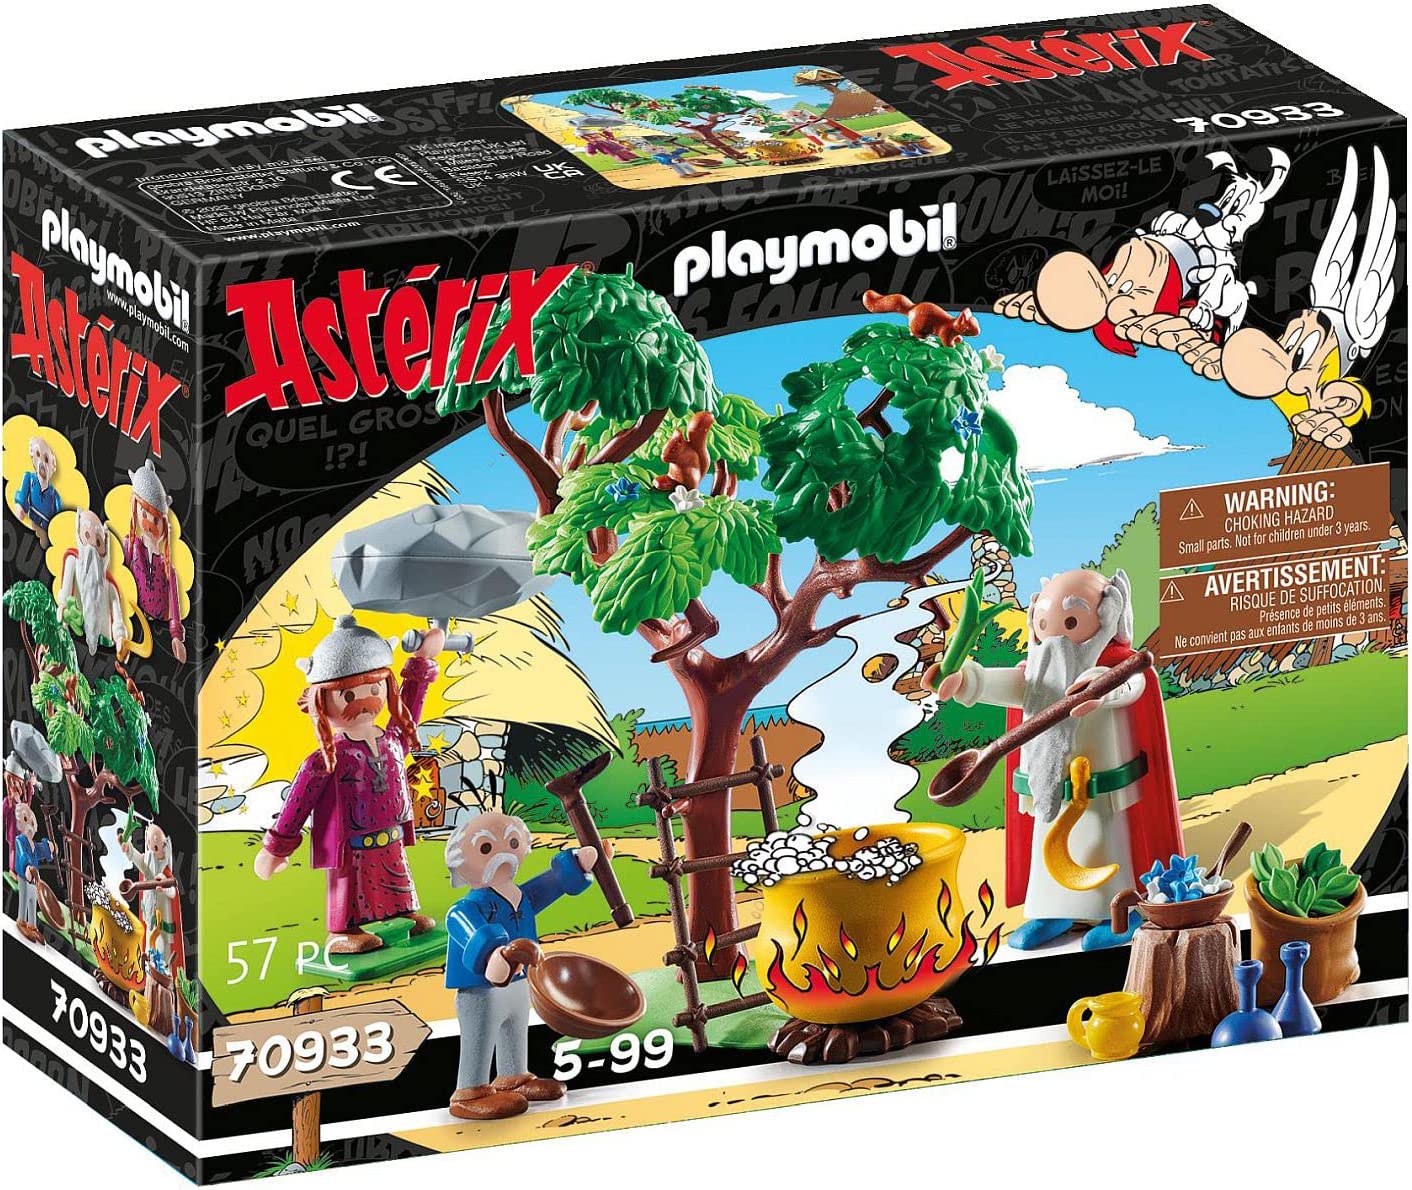 PLAYMOBIL Asterix 70933 Miraculix with Magic Potion Toy for Children from 5 Years